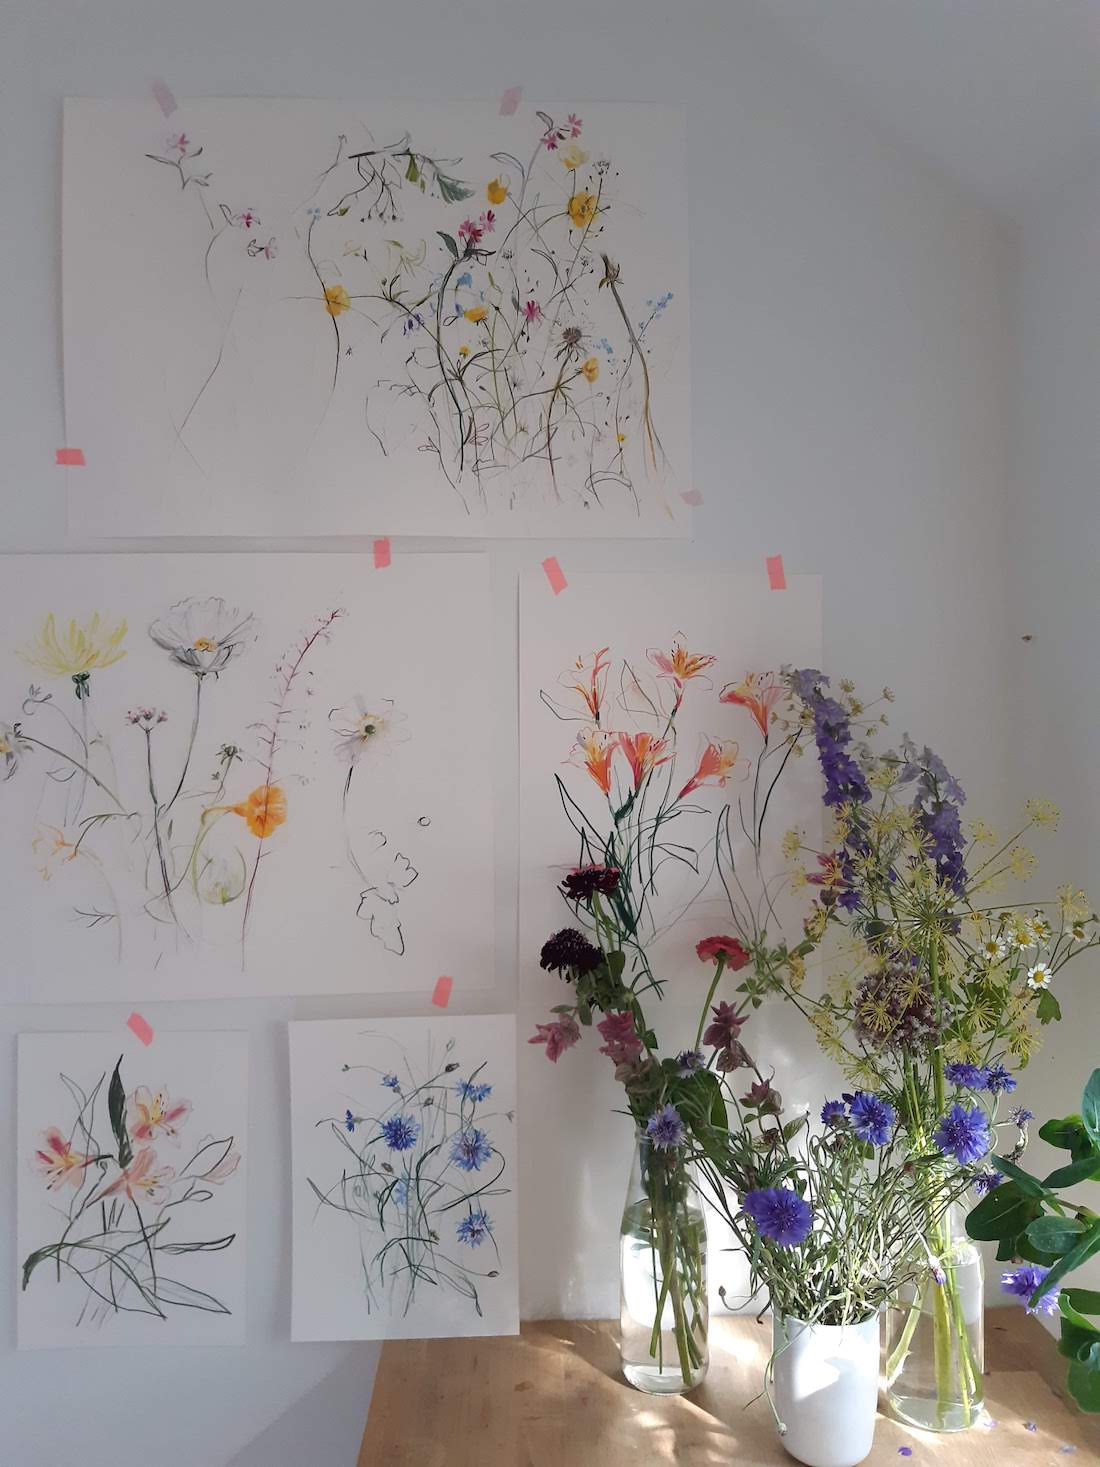 Floral illustration on walls by Claudia Lowry